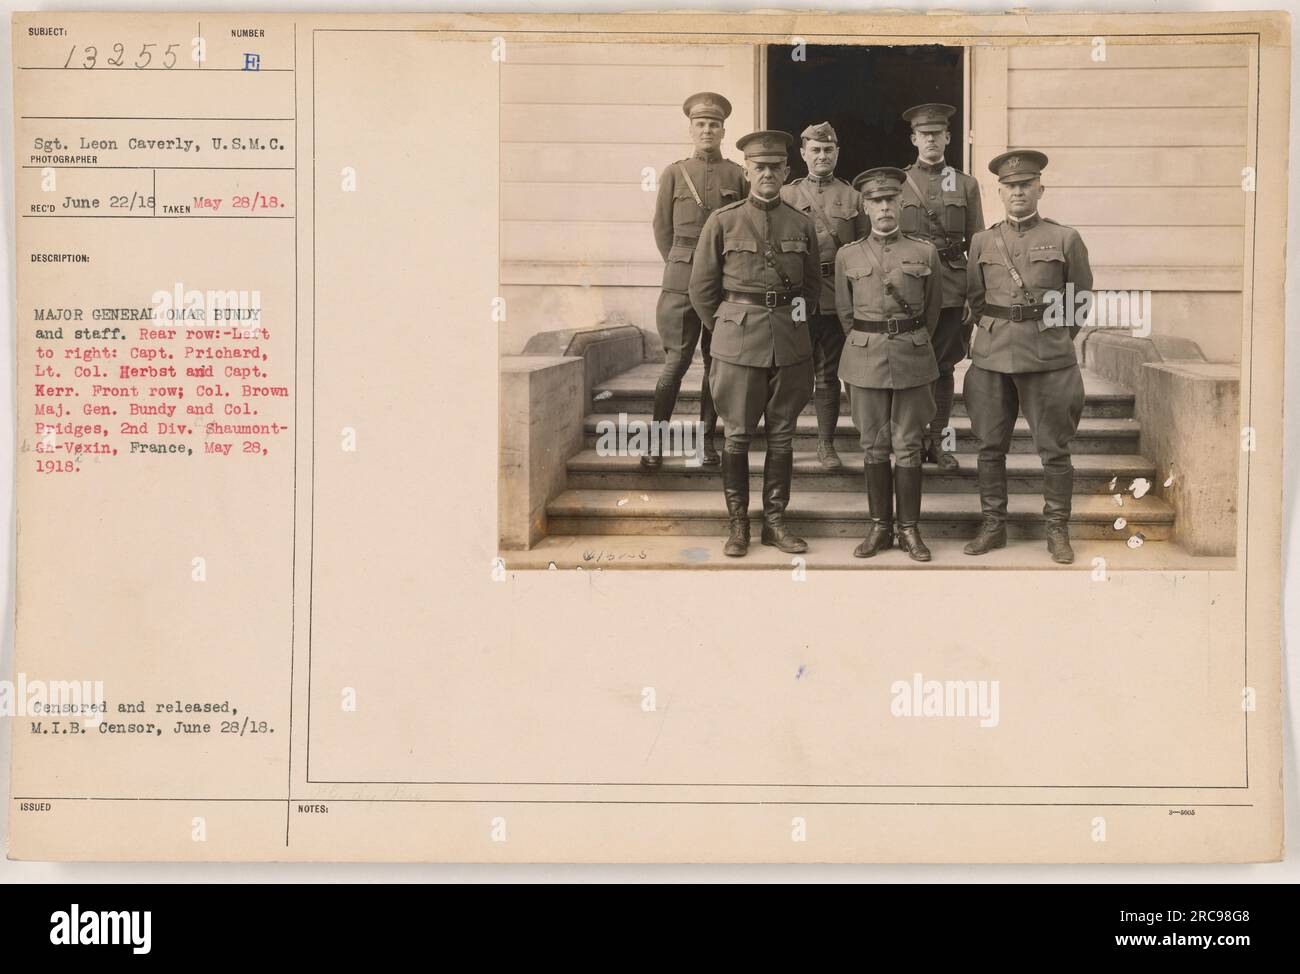 This image features Major General Omar Bundy and his staff. In the rear row, from left to right, are Captain Prichard, Lieutenant Colonel Herbst, and Captain Kerr. In the front row are Colonel Brown, Major General Bundy, and Colonel Bridges. The photograph was taken on May 28, 1918, at Shaumont-Gn-Vexin, France, during World War One. It was censored and released by the M.I.B. censor on June 28, 1918. Stock Photo